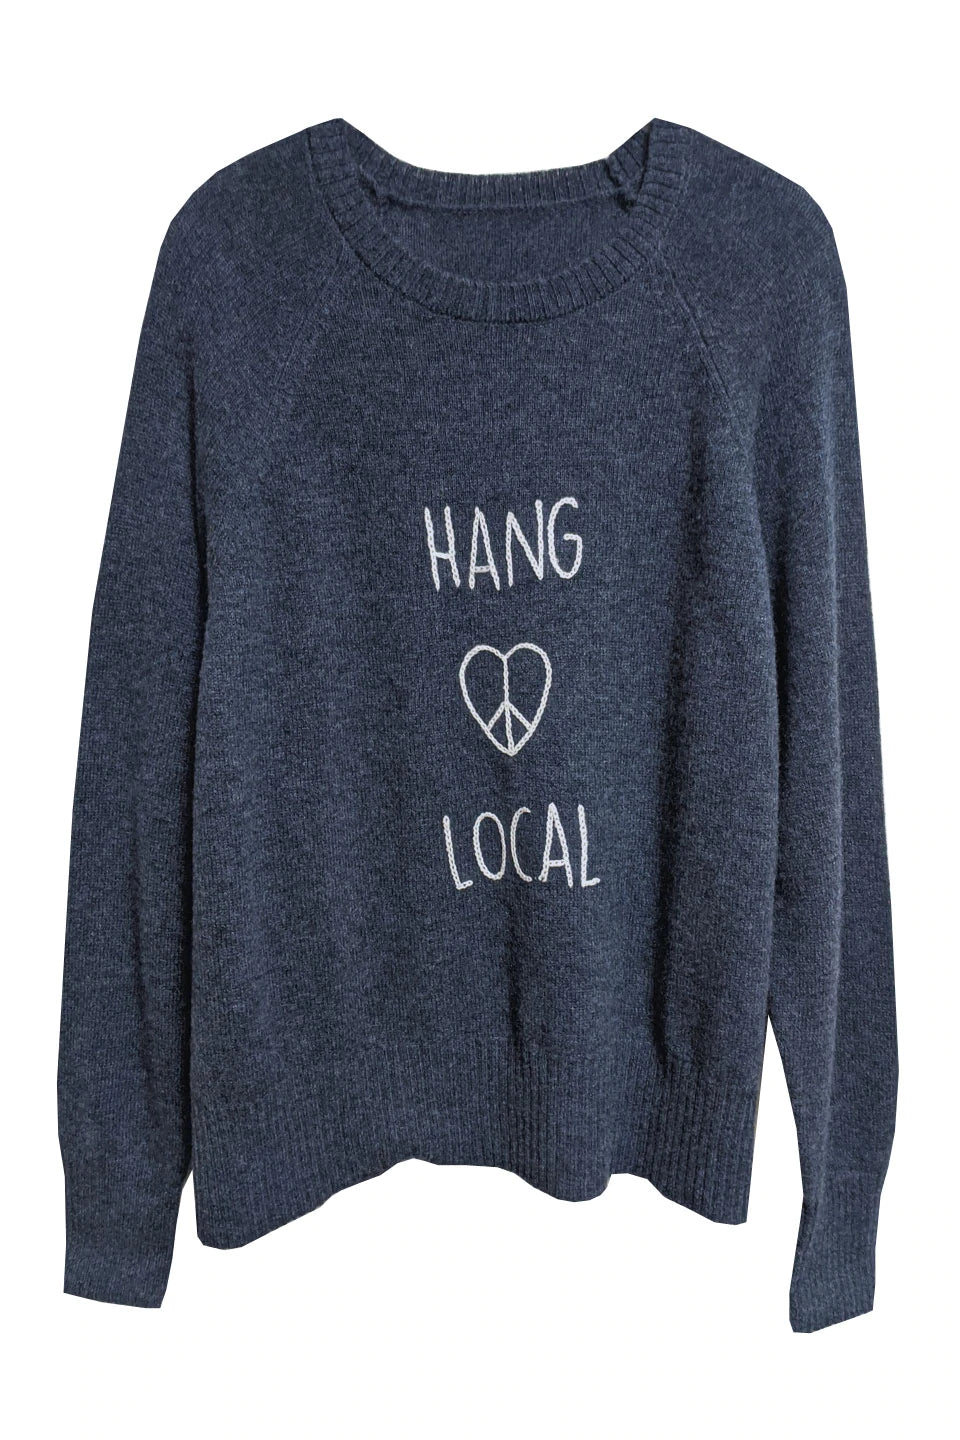 Hang Local Cashmere Crew